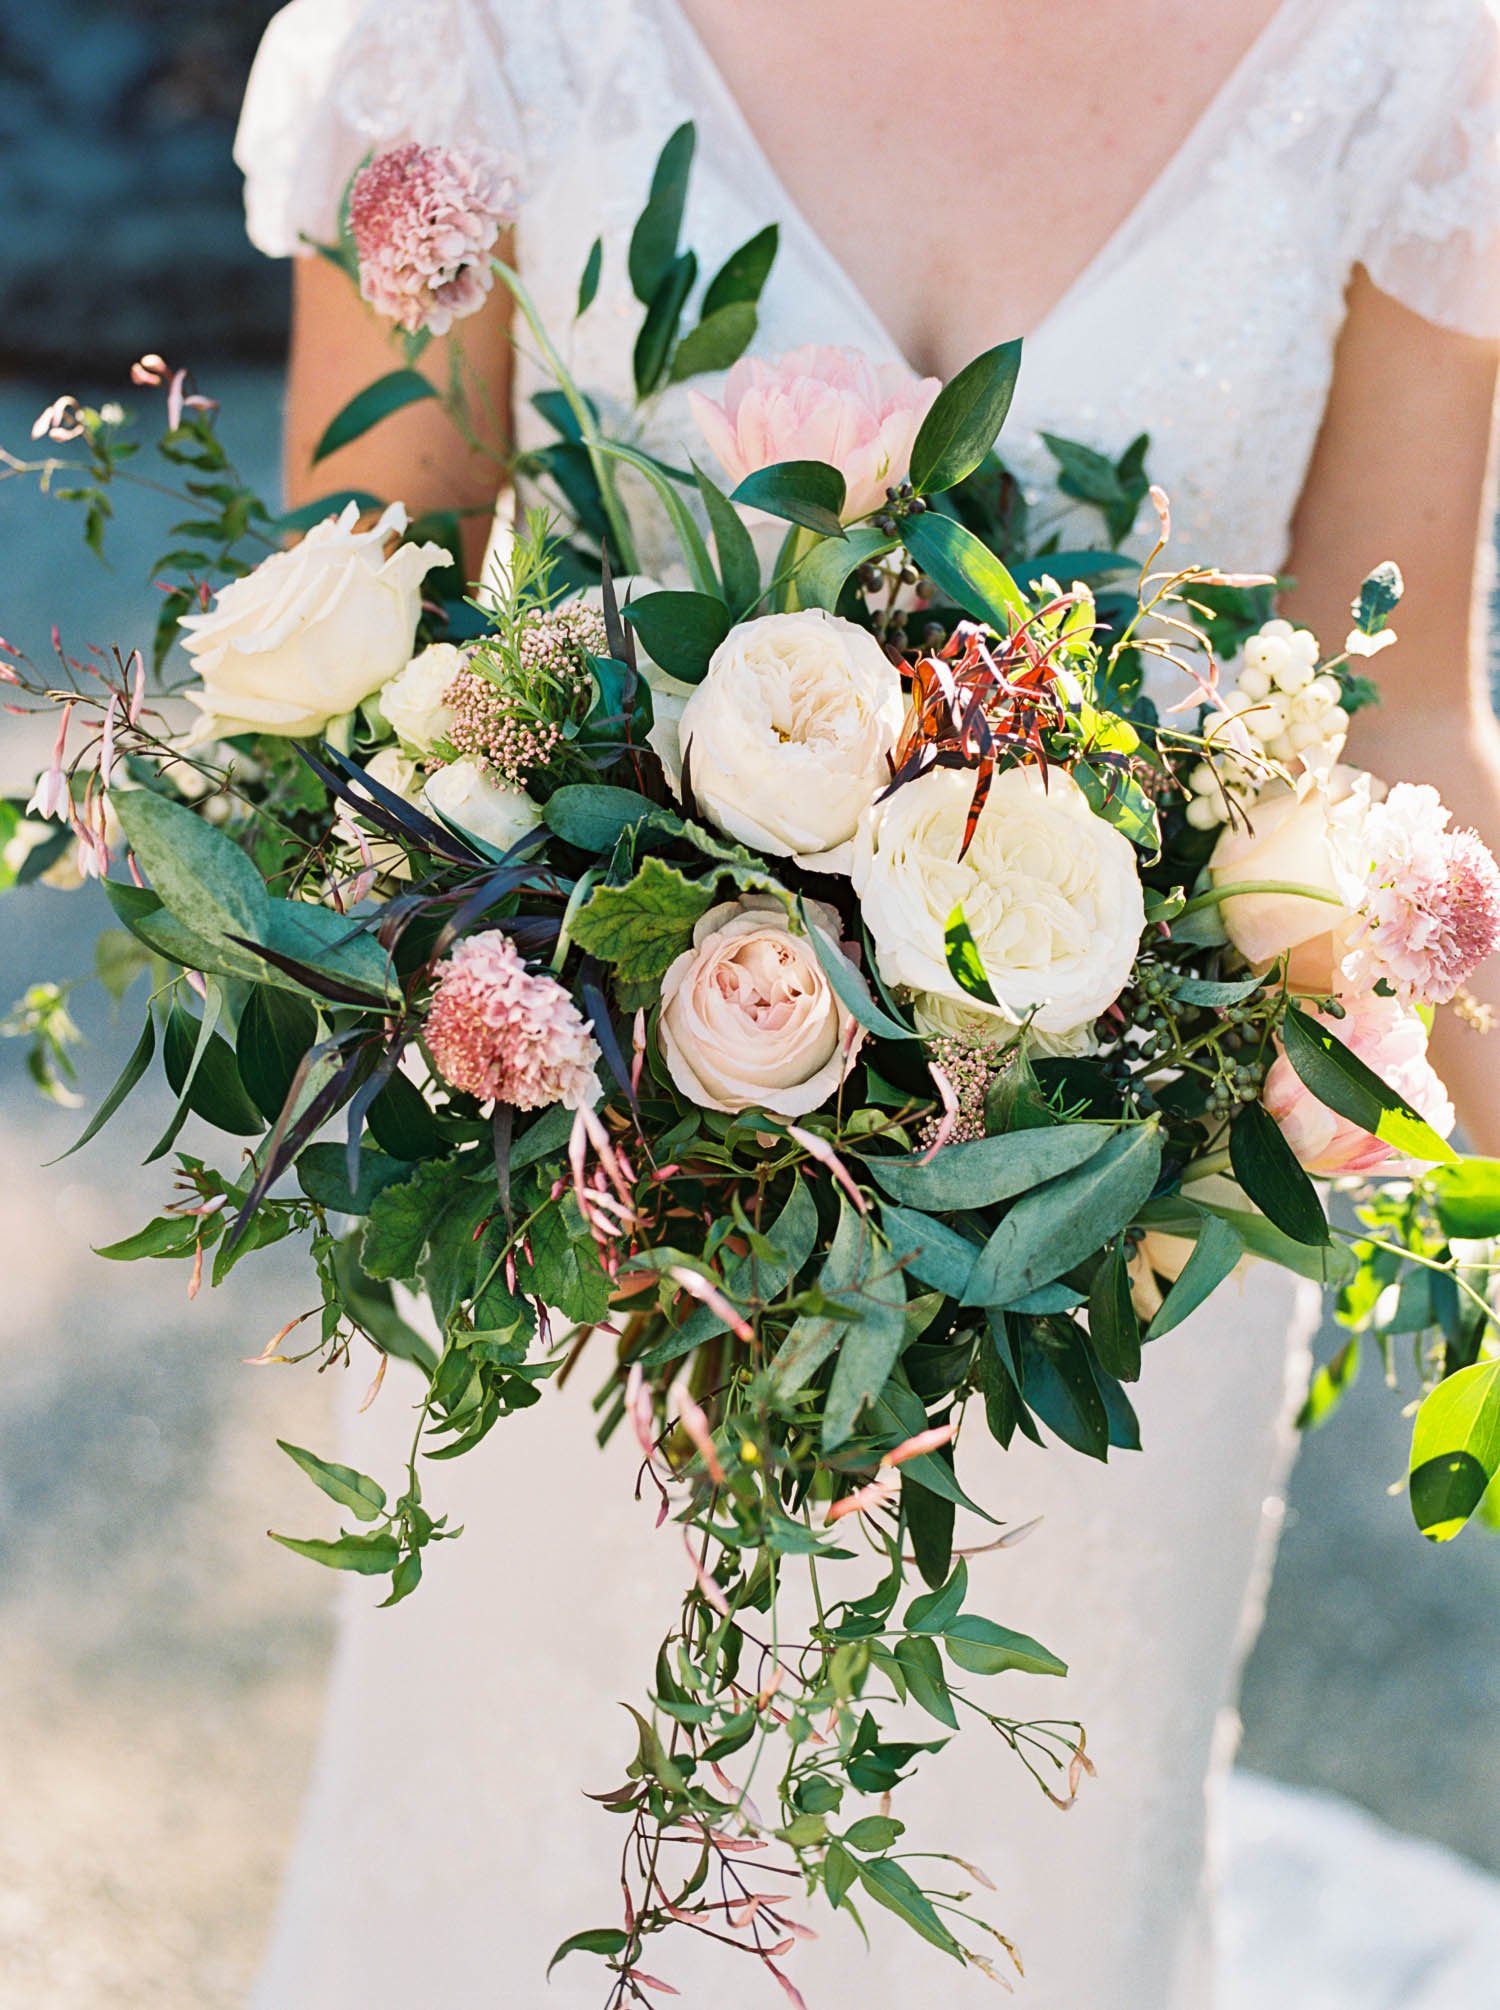  Closeup of bride holding cascading bouquet of white and blush pink garden roses, greenery and jasmine 